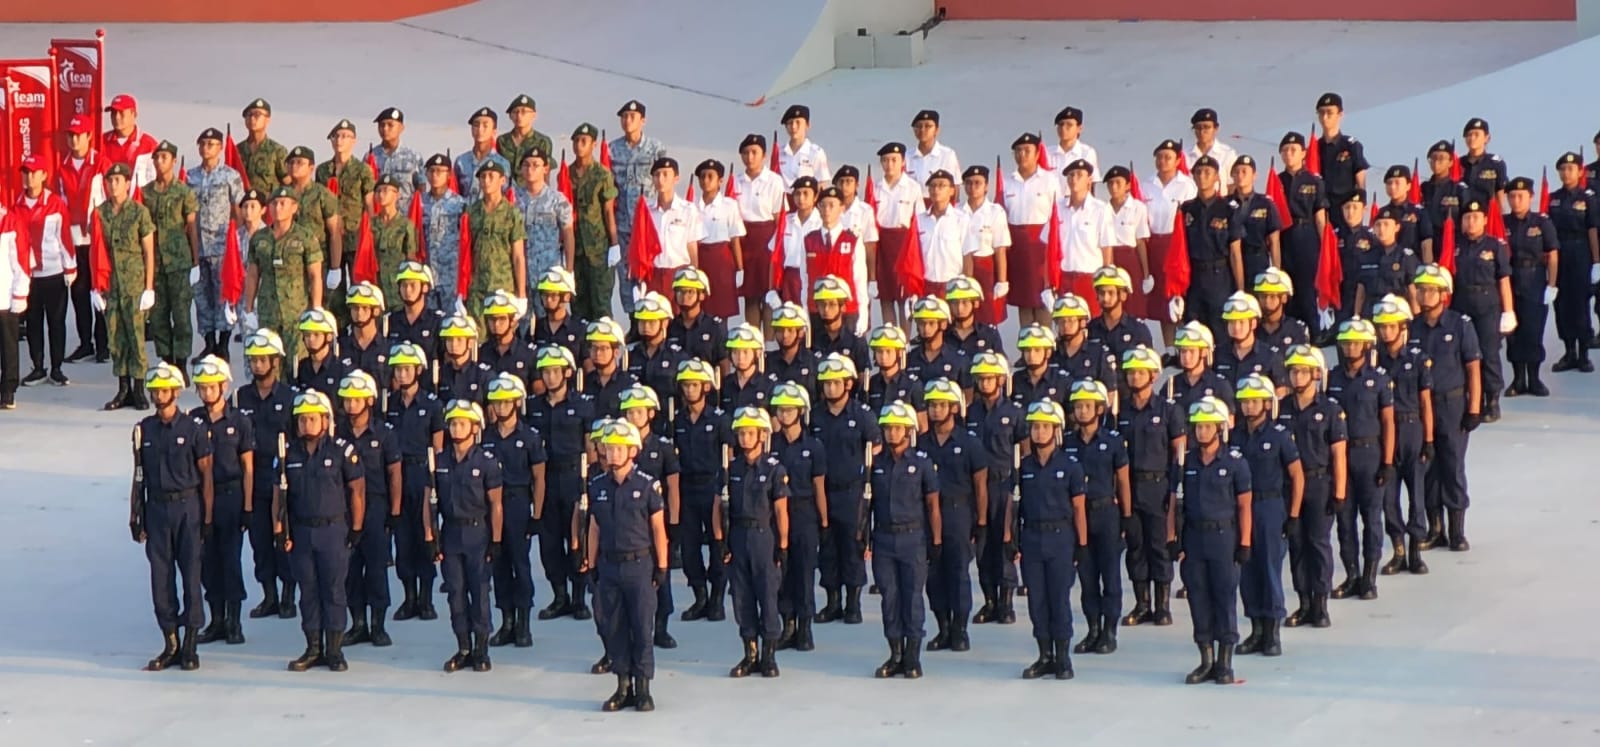 The SCDF and NCDCC contingent at the National Day Parade